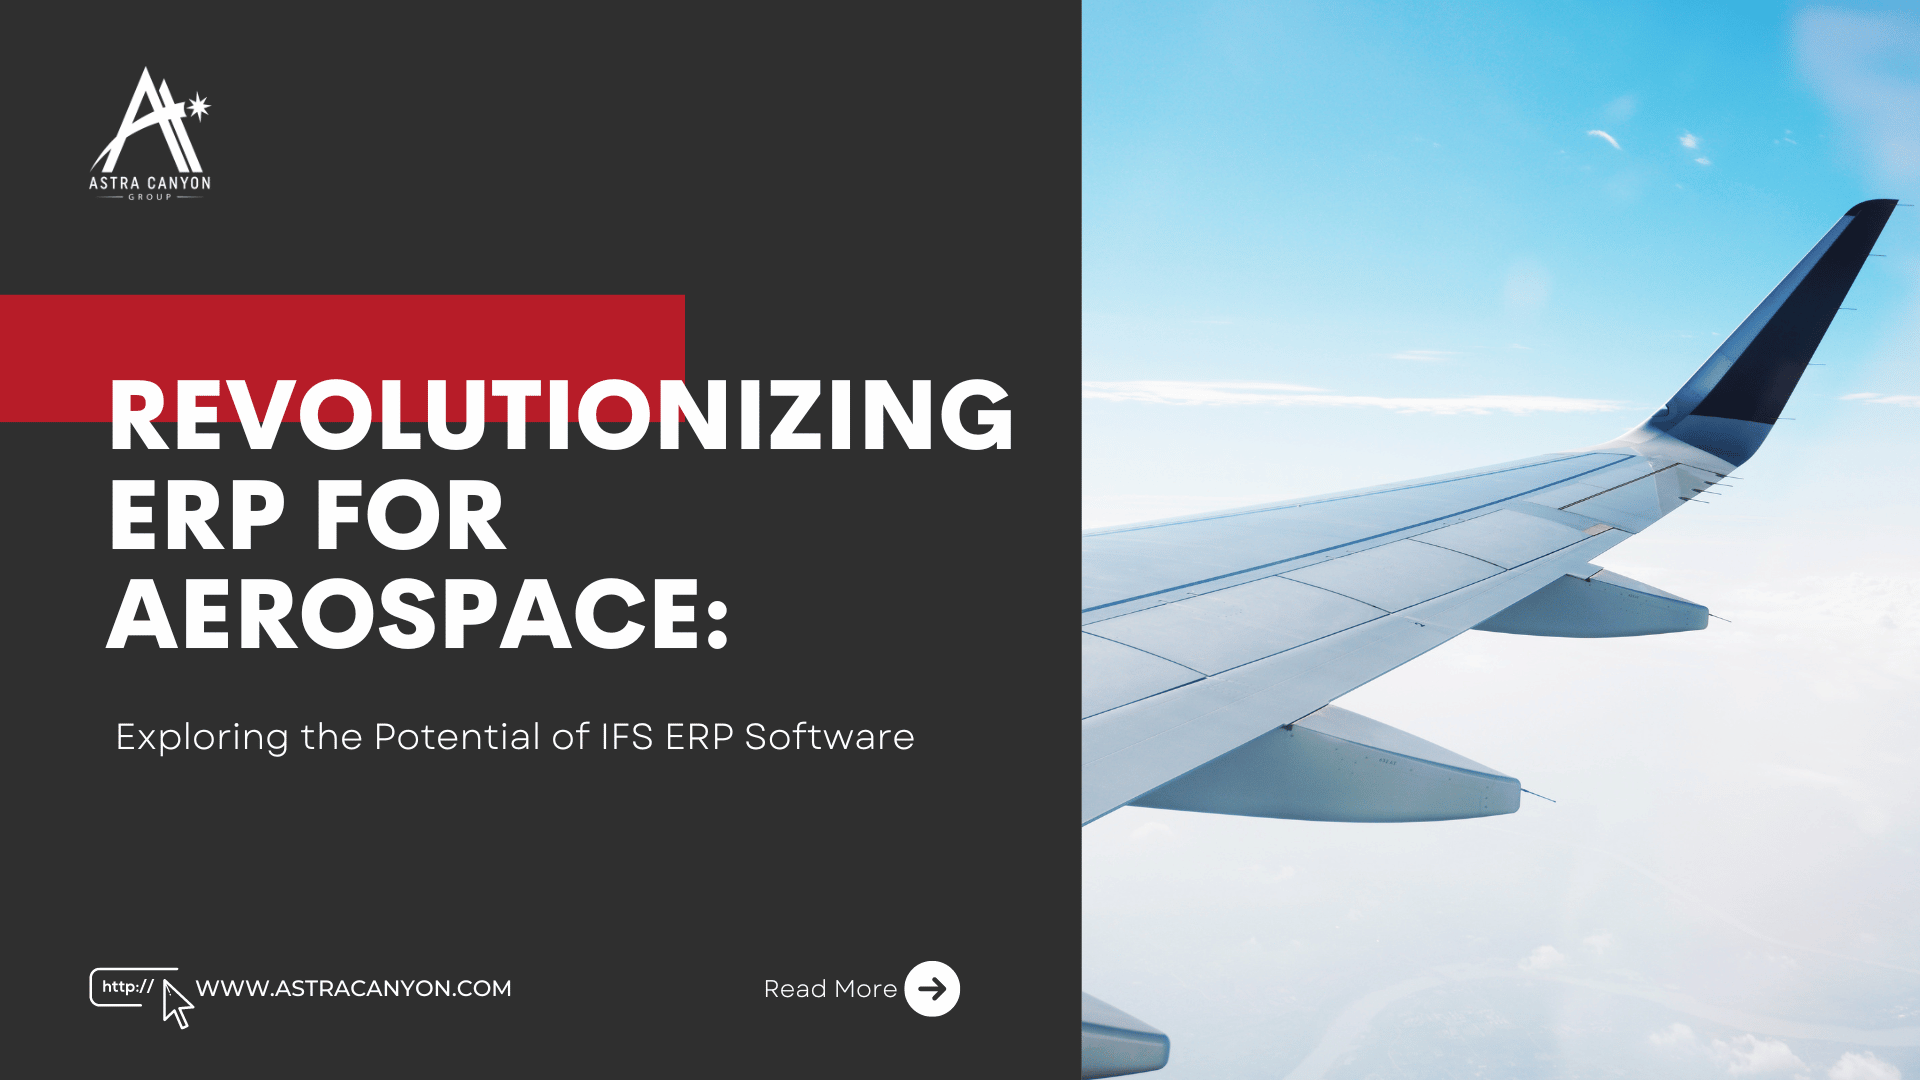 Revolutionizing ERP for Aerospace: Exploring the Potential of IFS ERP Software